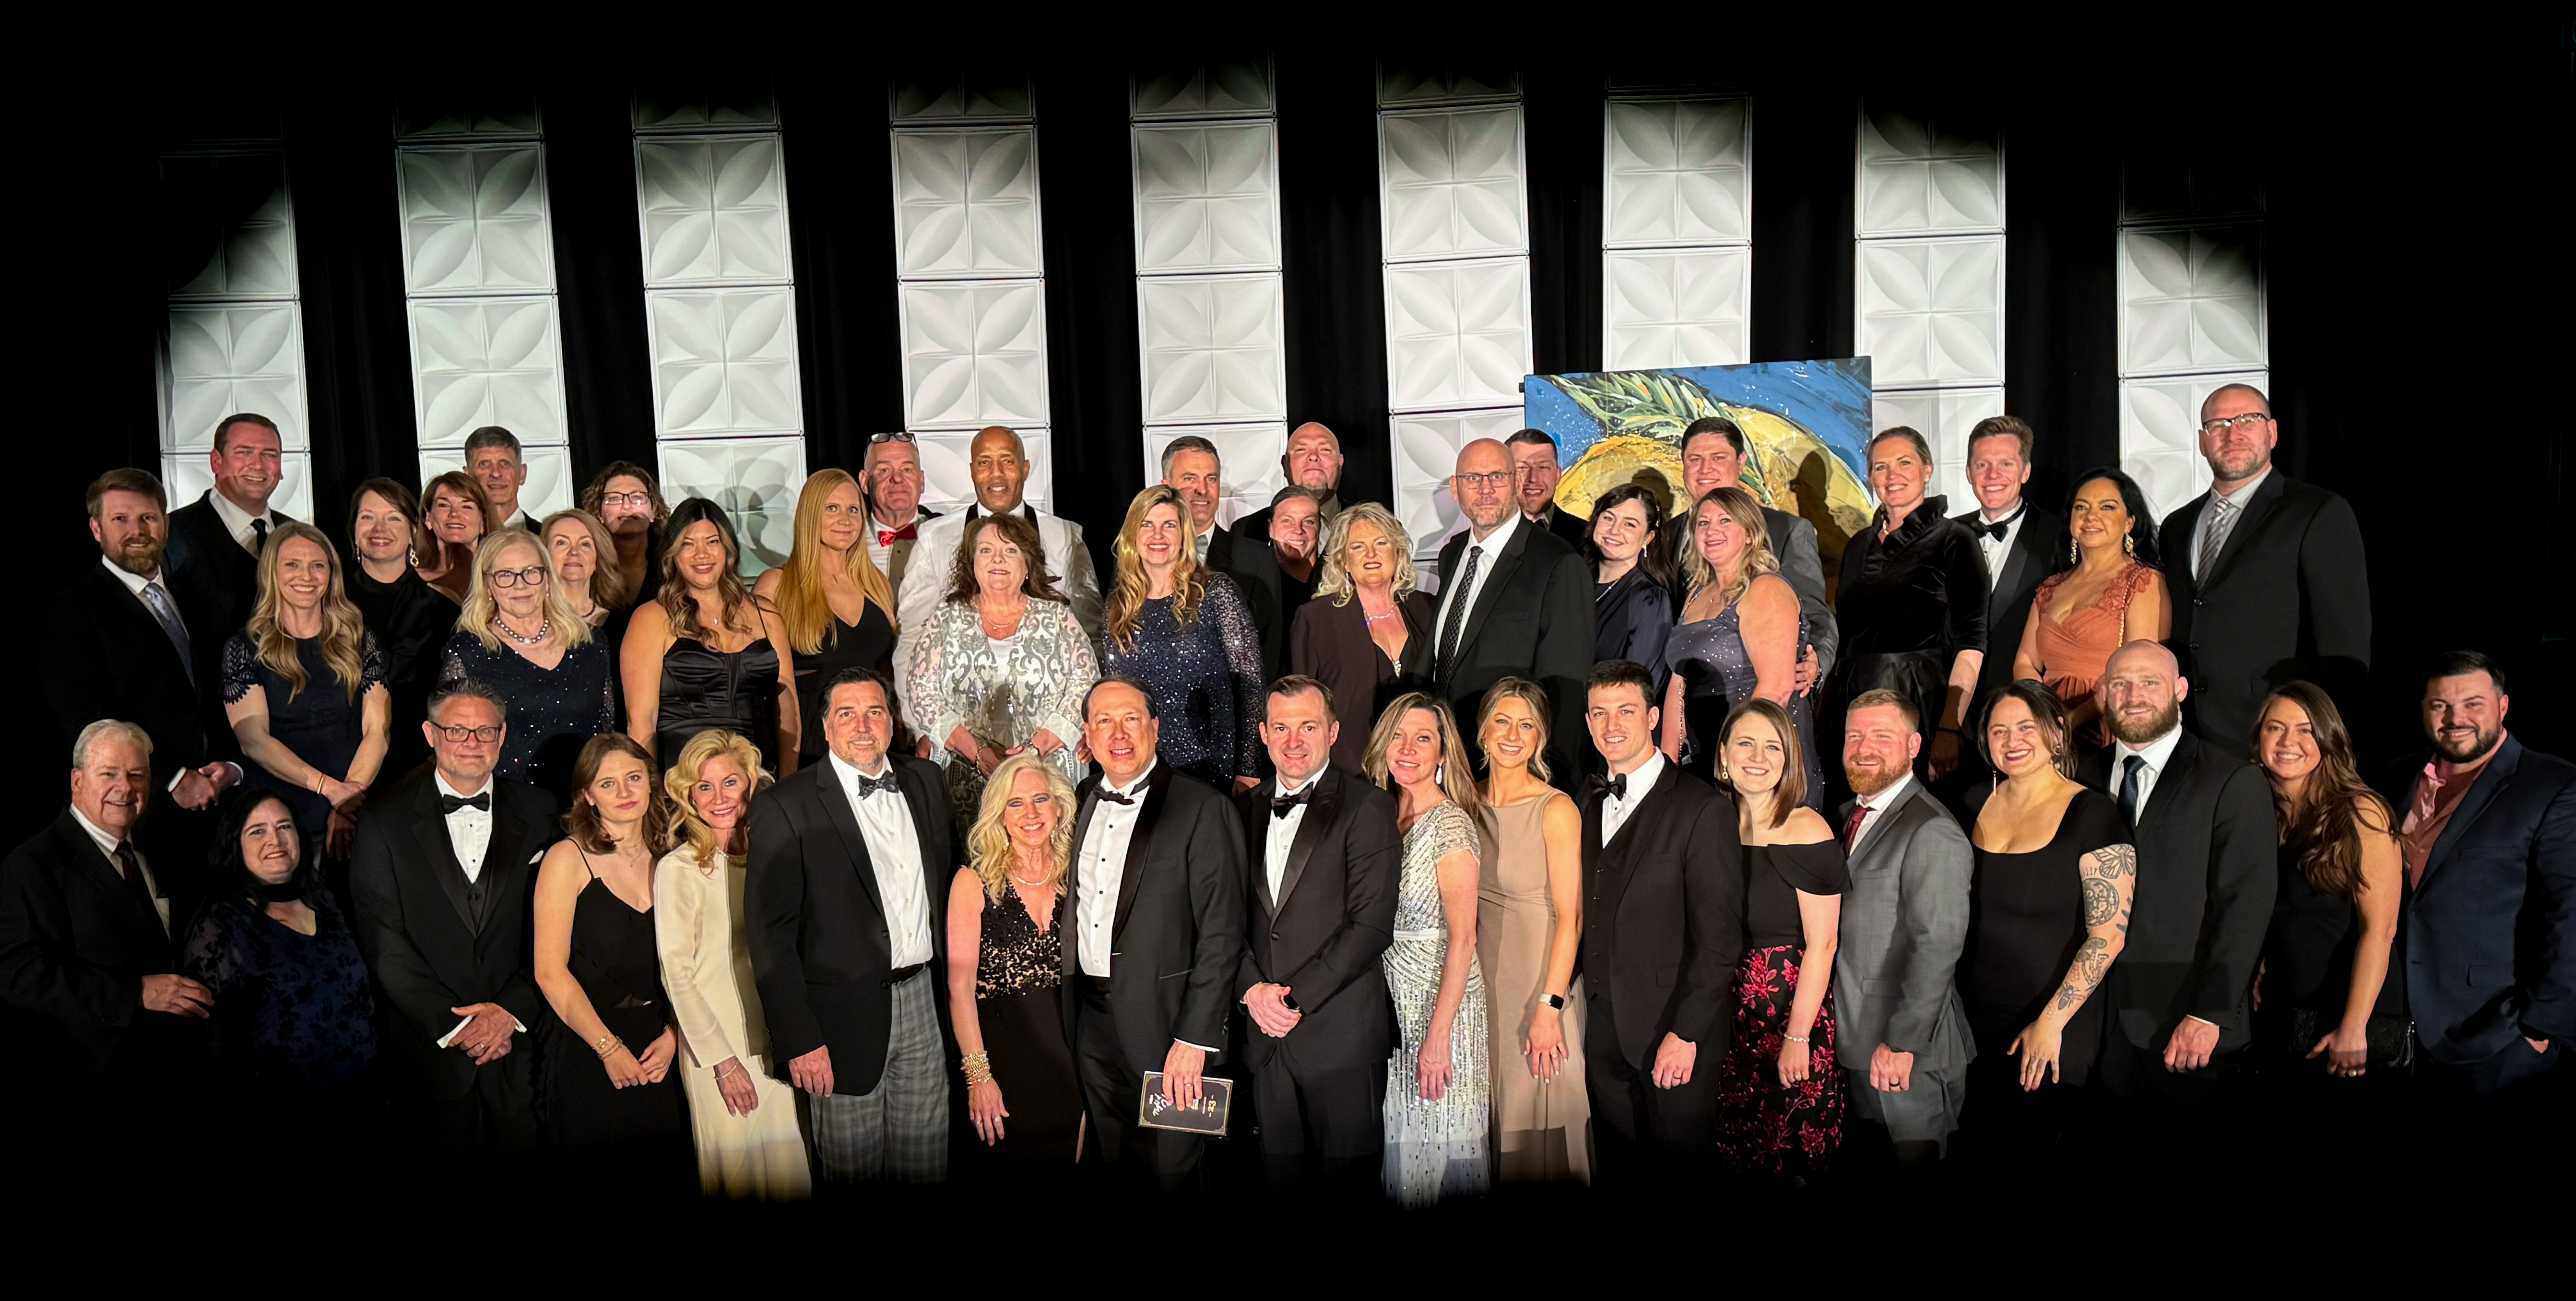 Control Southern was recognized at the Annual MDA Night of Hope Gala.